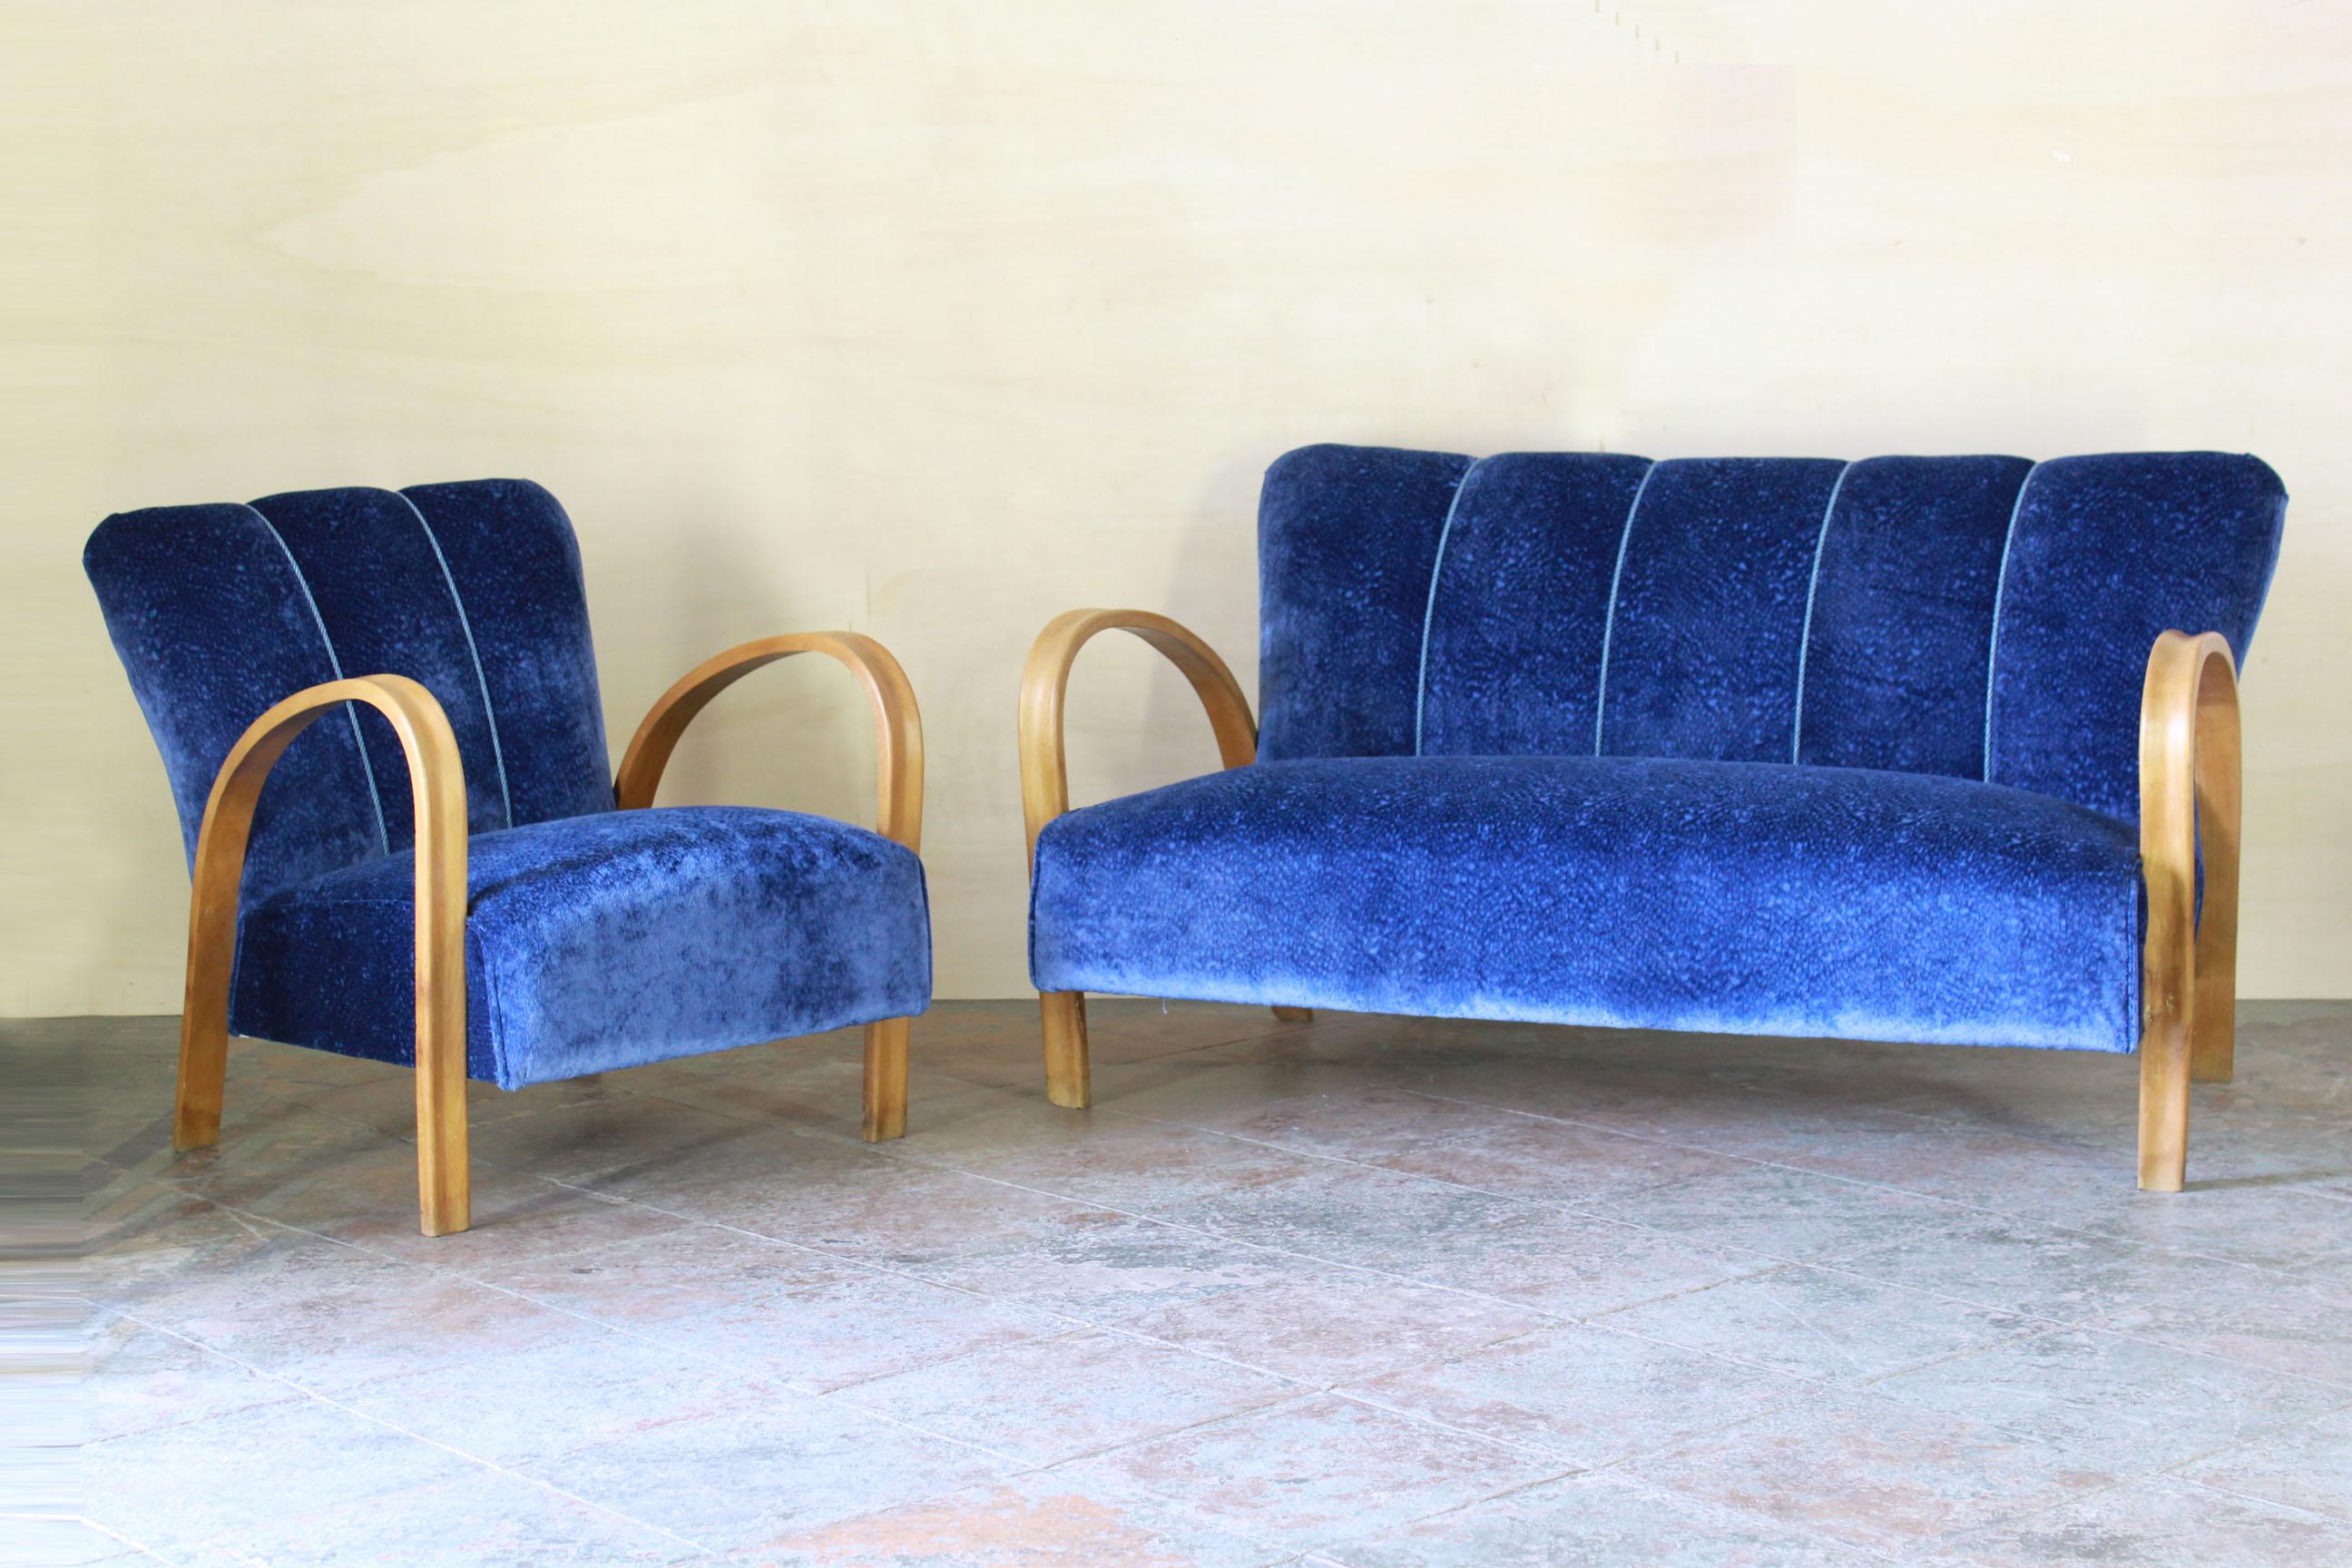 1940s vintage sofa in art deco style with velvet blue cover 8